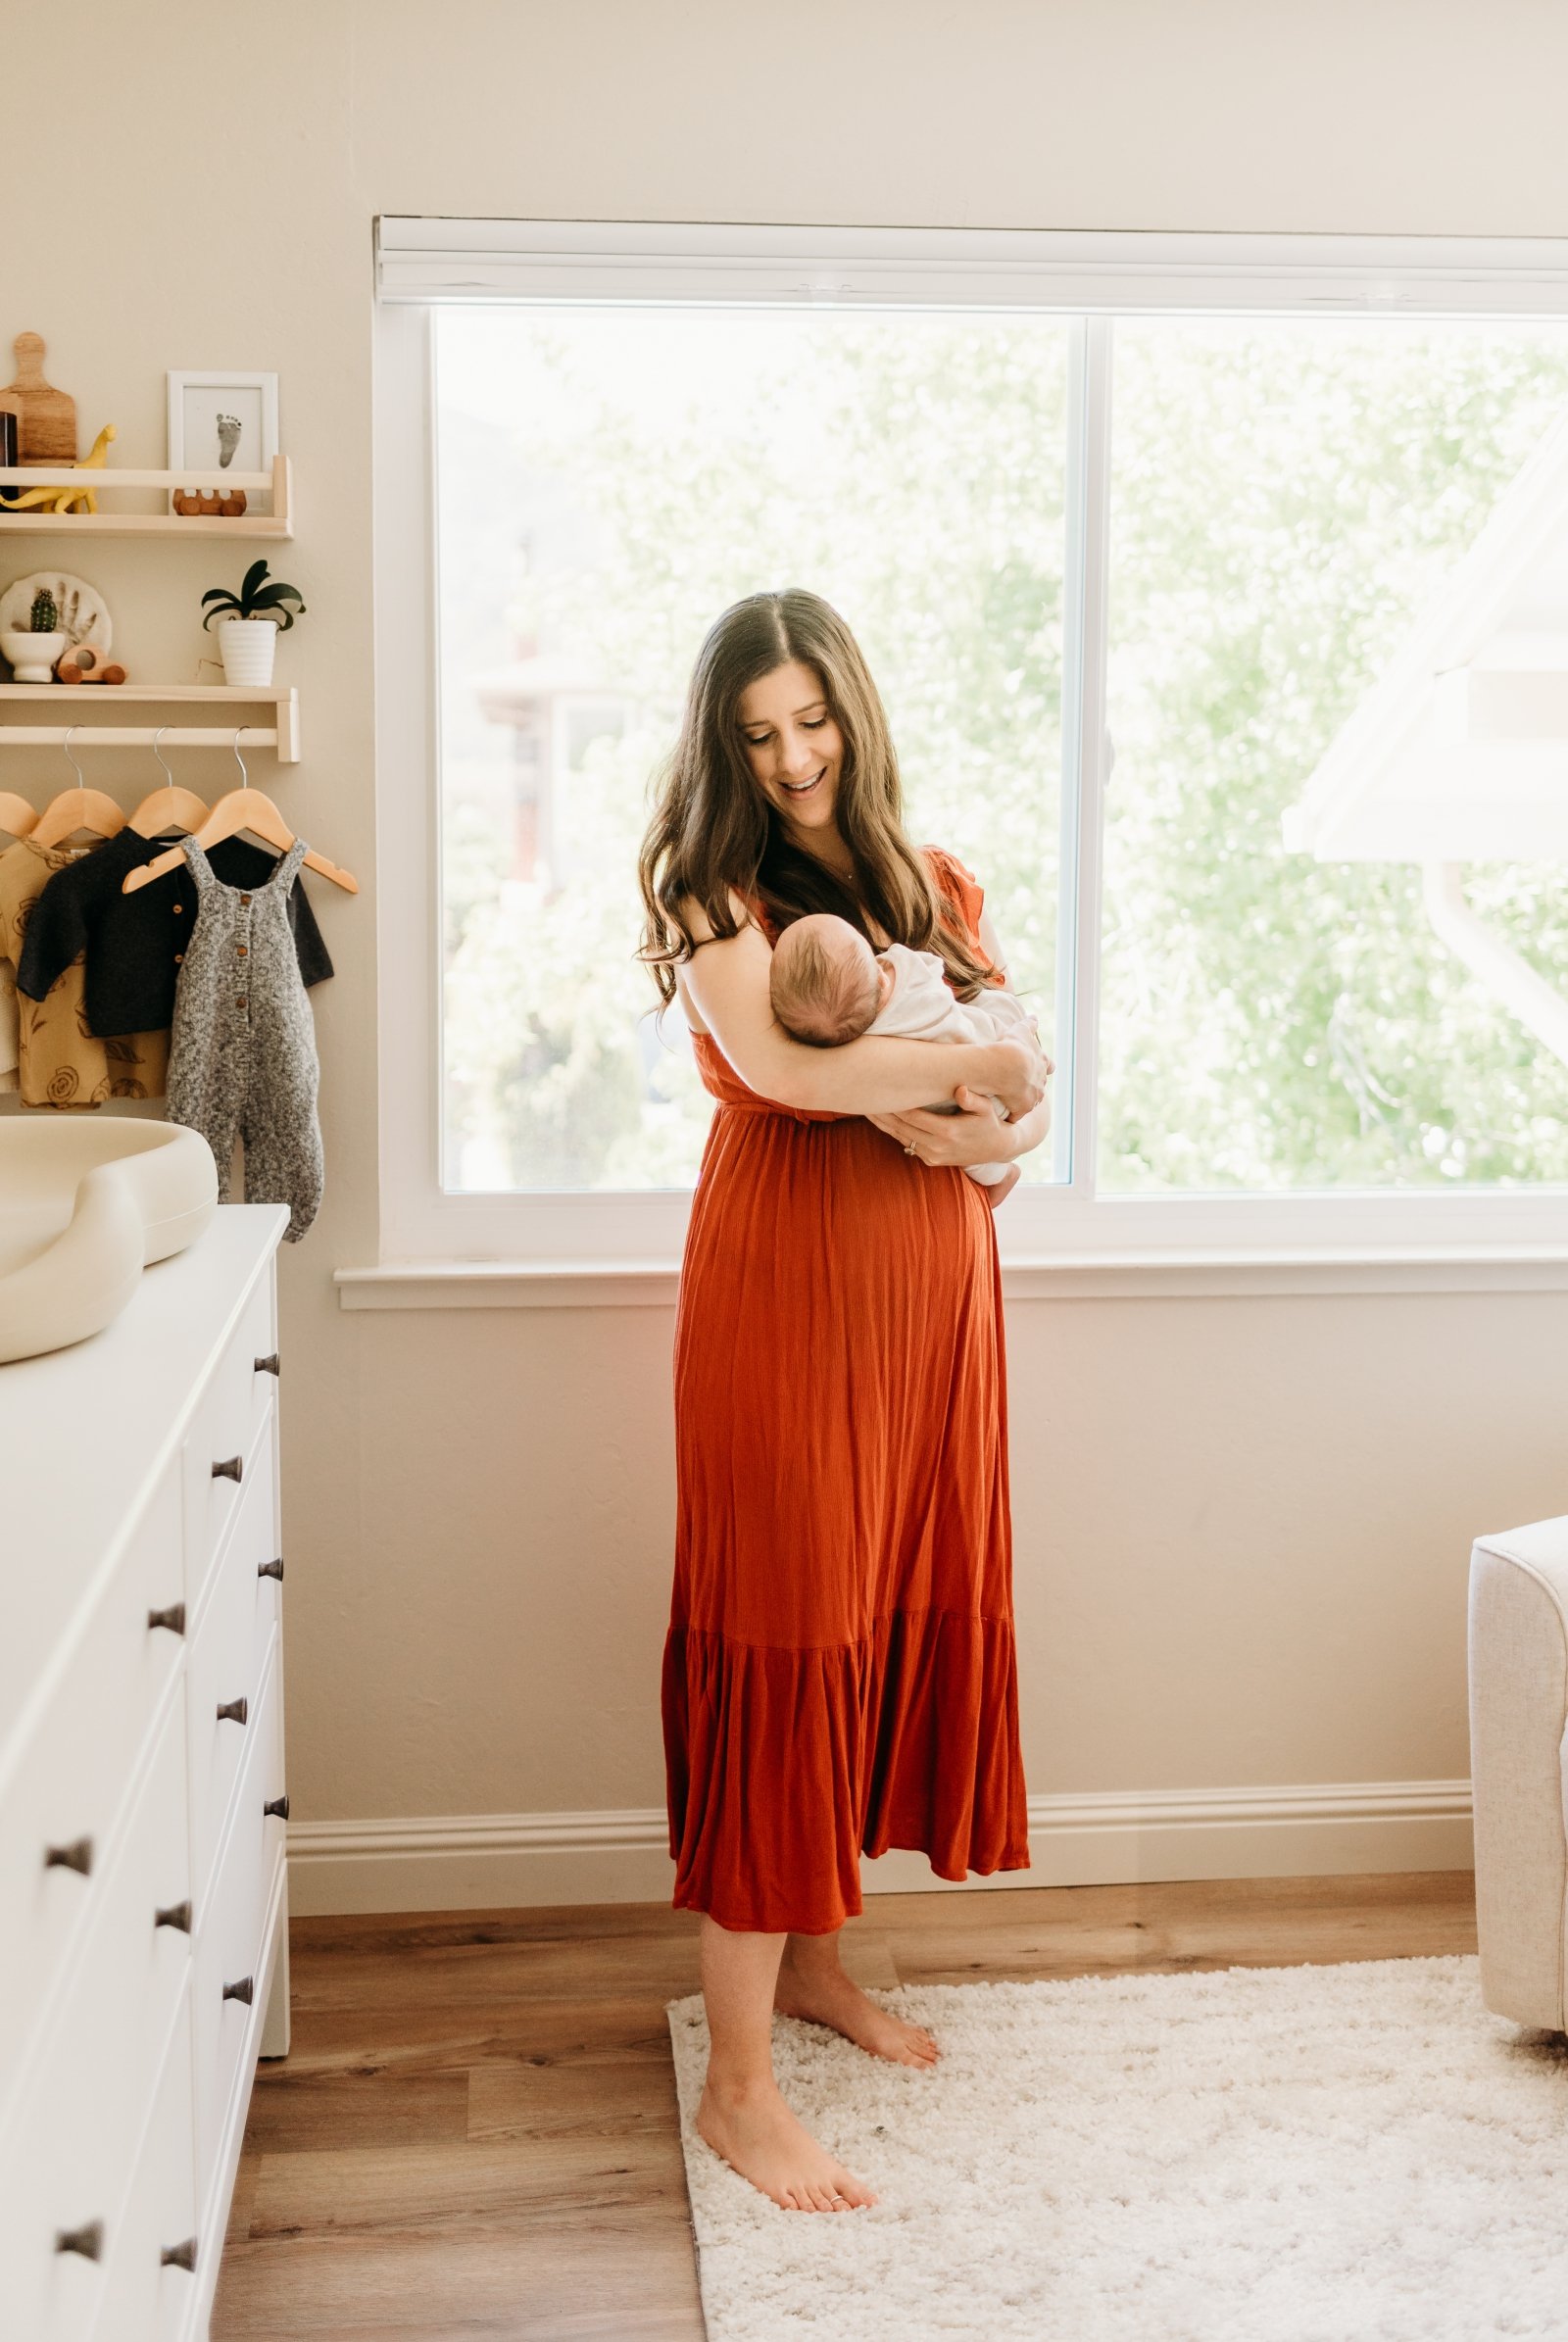 bay area newborn photographer in home lifestyle session pacifica photoshoot young soul photography 23.jpg